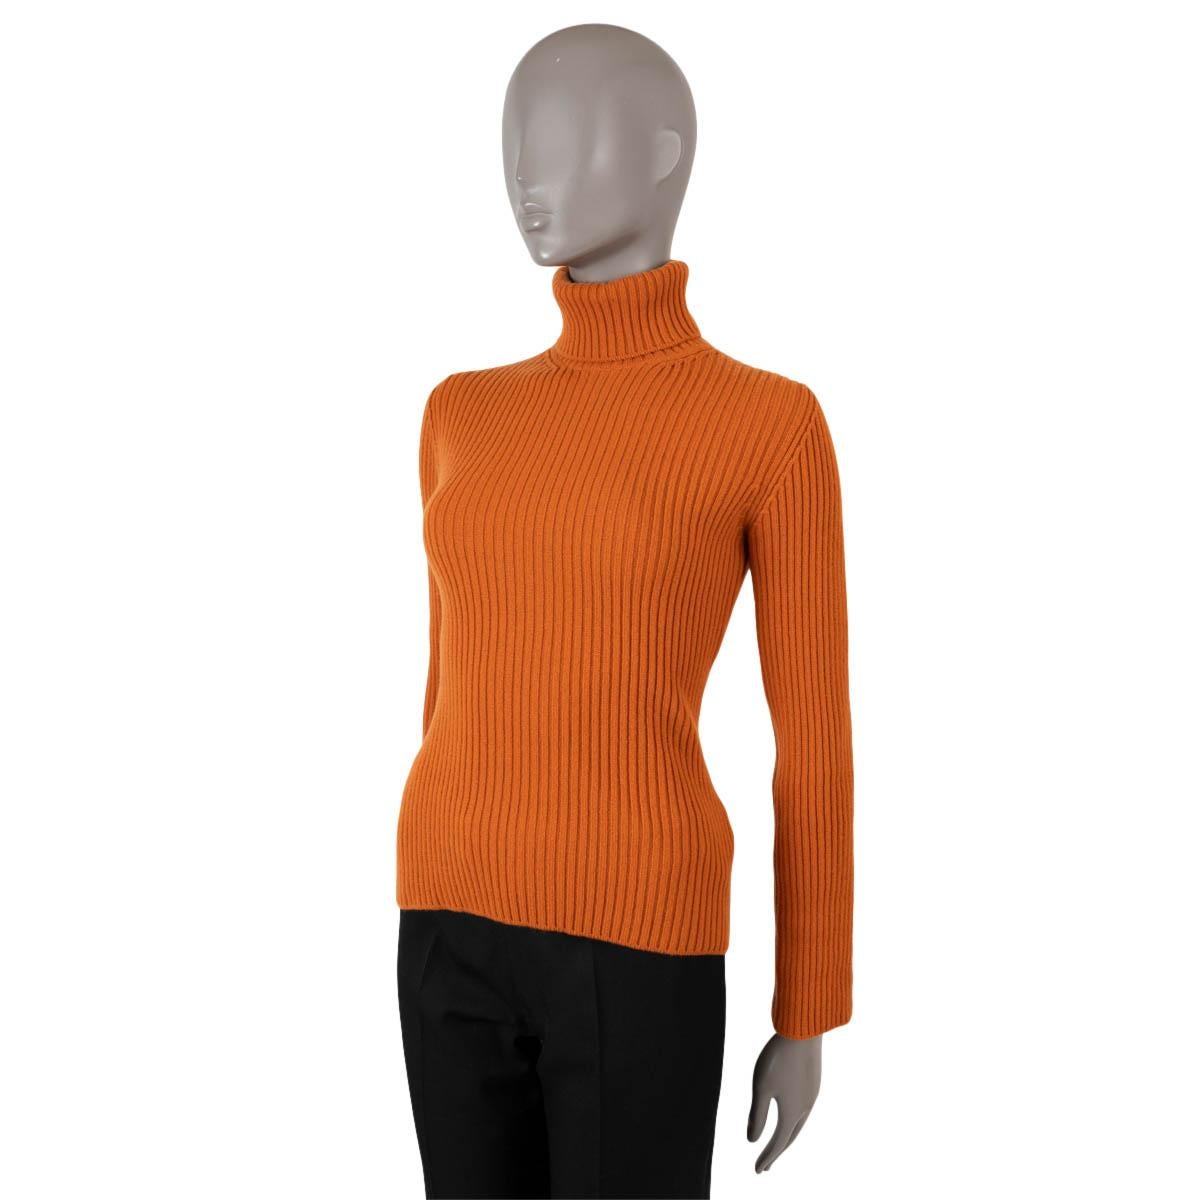 100% authentic Loro Piana Dolcevita Lincoln rib-knit turtleneck sweater in pumpkin baby cashmere (100%). Unlined. Has been worn and is in excellent condition.

Measurements
Model	FAL3580 
Tag Size	38
Size	XS
Shoulder Width	36cm (14in)
Bust From	80cm